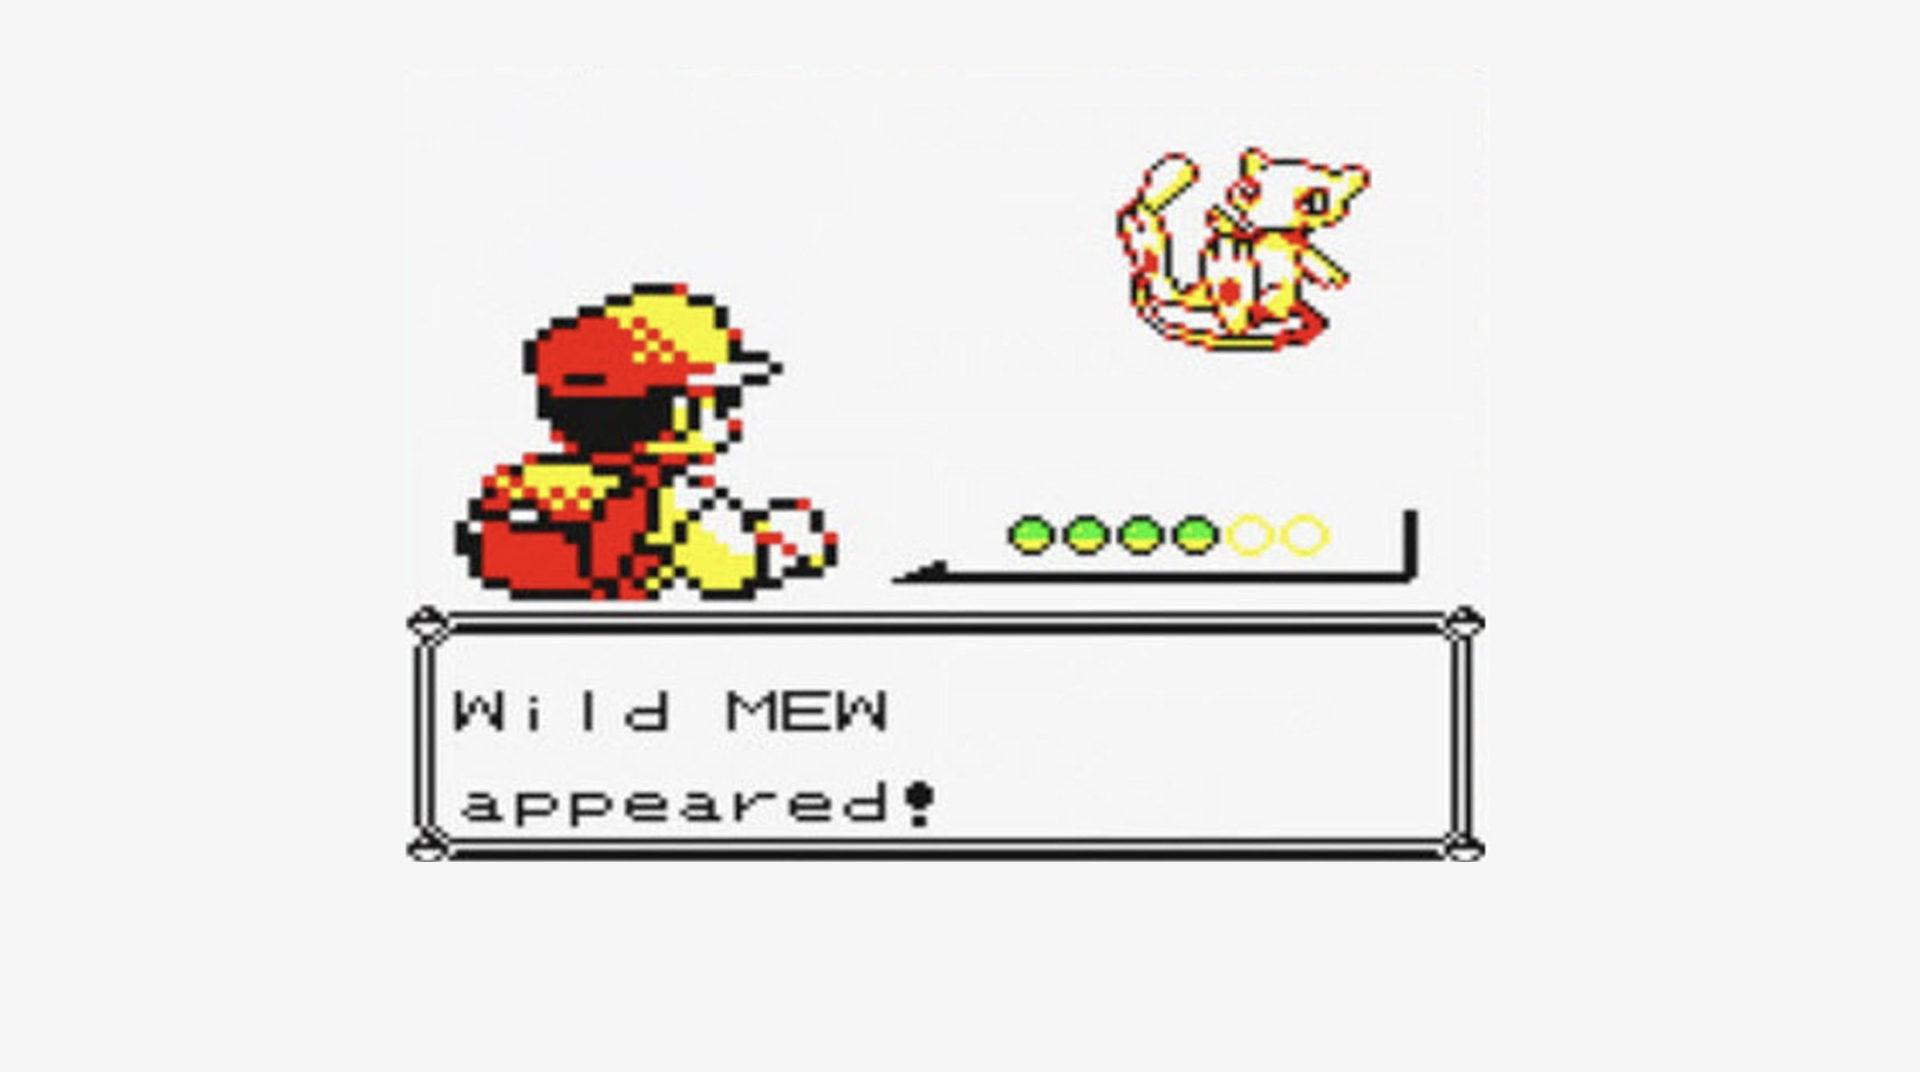 Screenshot of Mew in Pokemon Red & Blue from 1996.